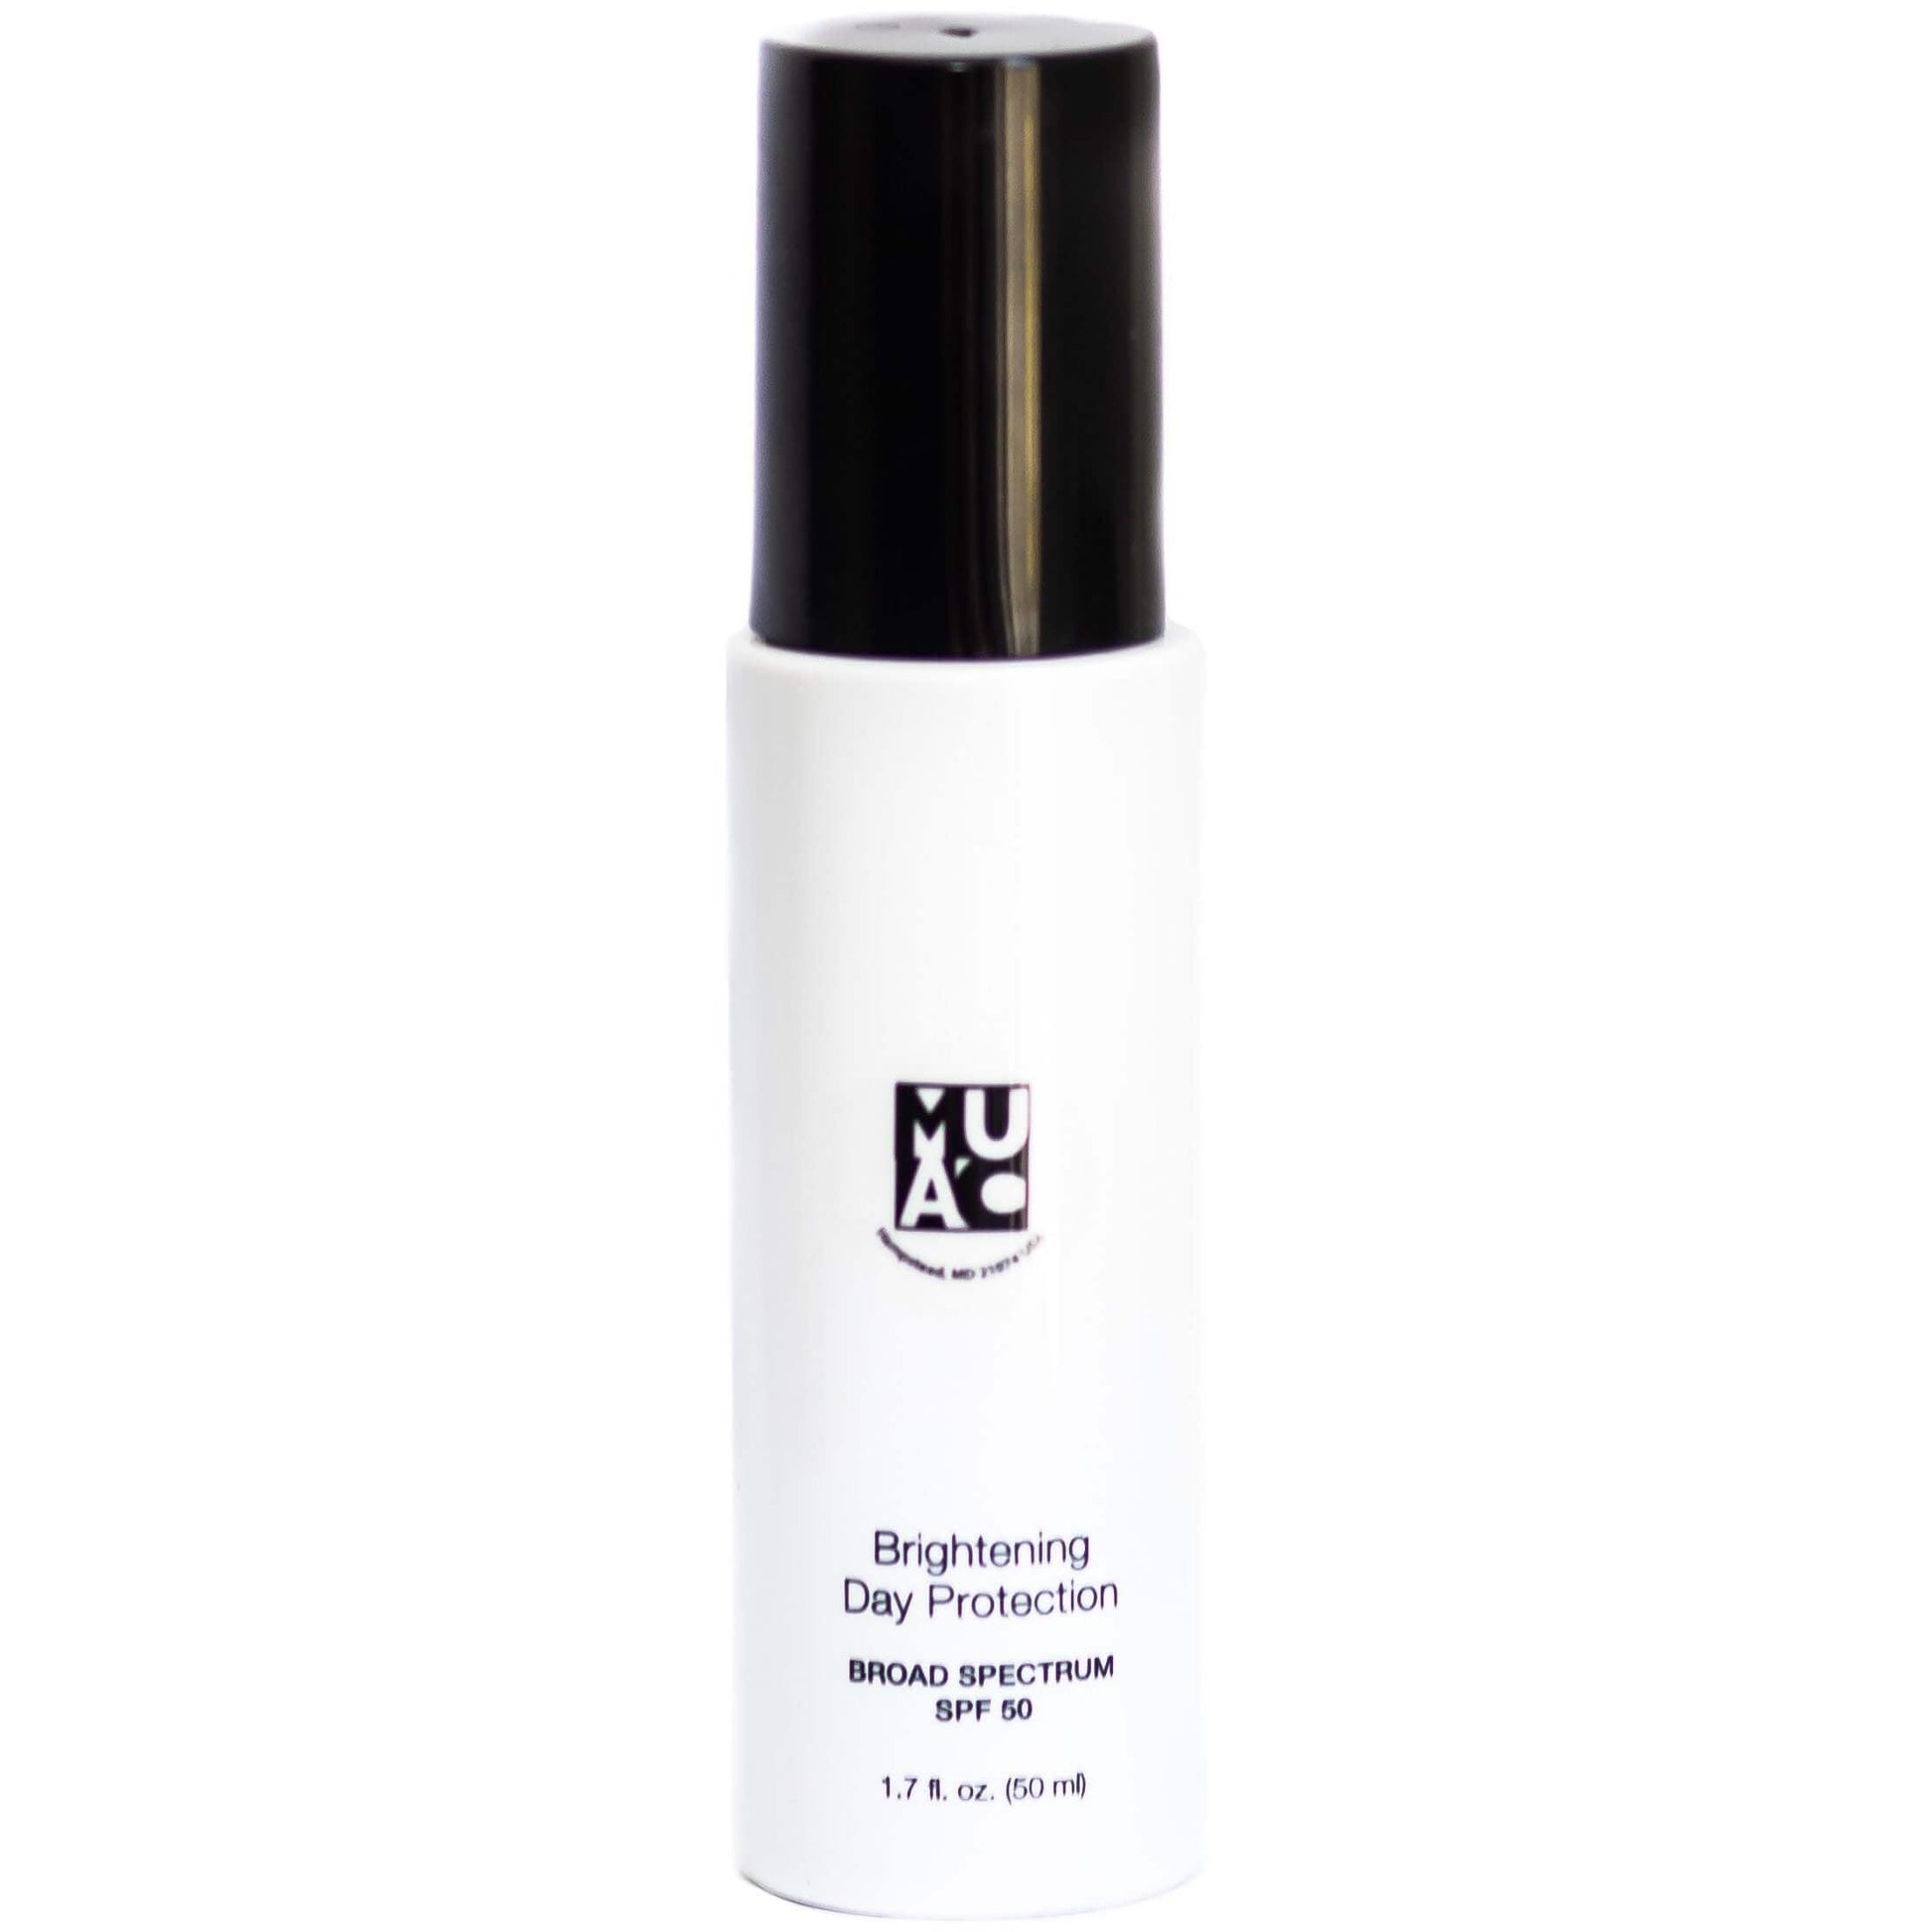 MUAC Brightening Day Protection - SPF 50 - Makeup Artists' Choice (4717006323802)